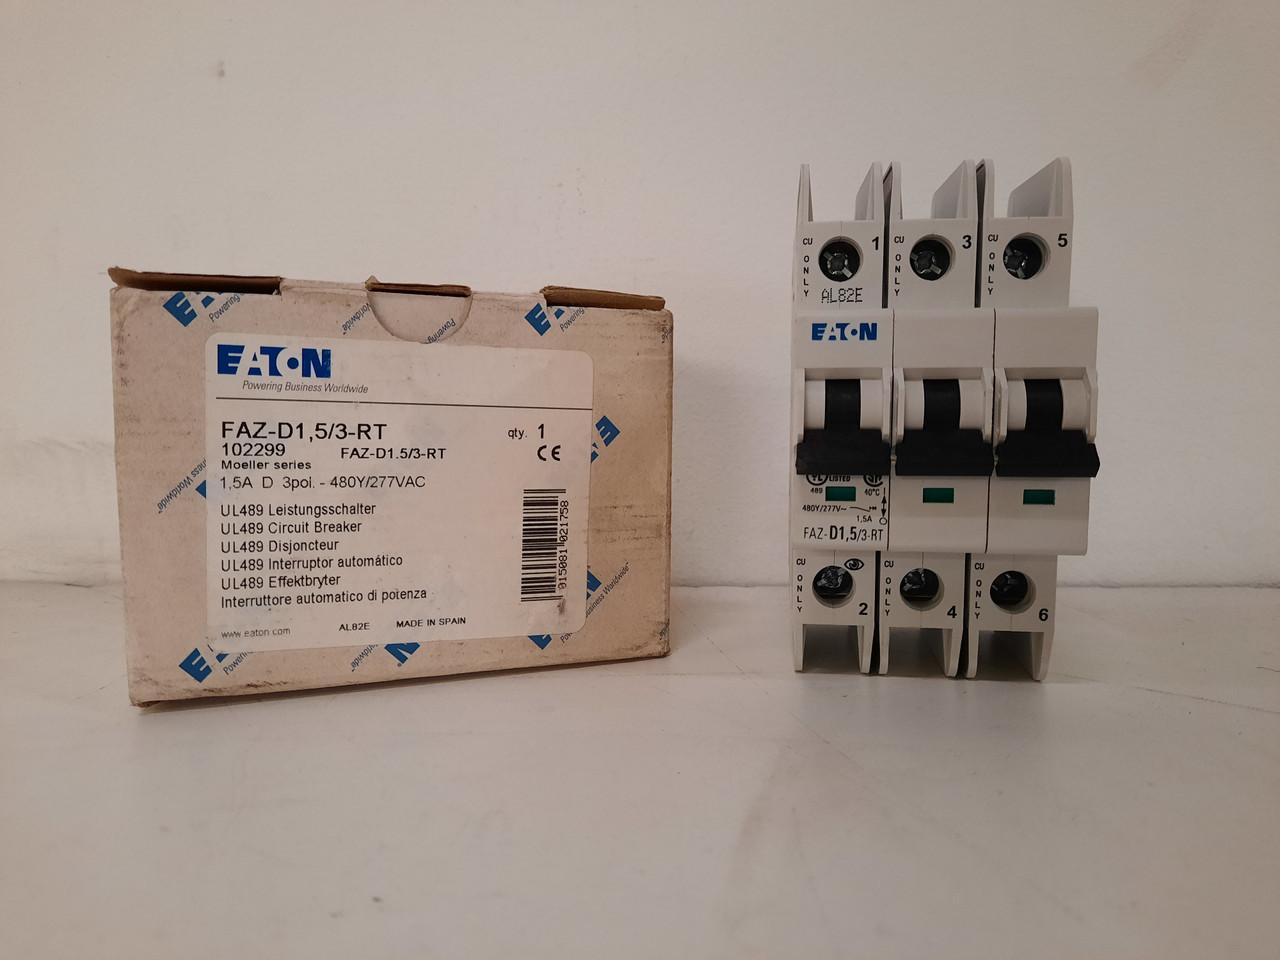 Eaton FAZ-D1.5/3-RT 277/480 VAC 50/60 Hz, 1.5 A, 3-Pole, 10/14 kA, 10 to 20 x Rated Current, Ring Tongue Terminal, DIN Rail Mount, Standard Packaging, D-Curve, Current Limiting, Thermal Magnetic, Miniature Circuit Breaker